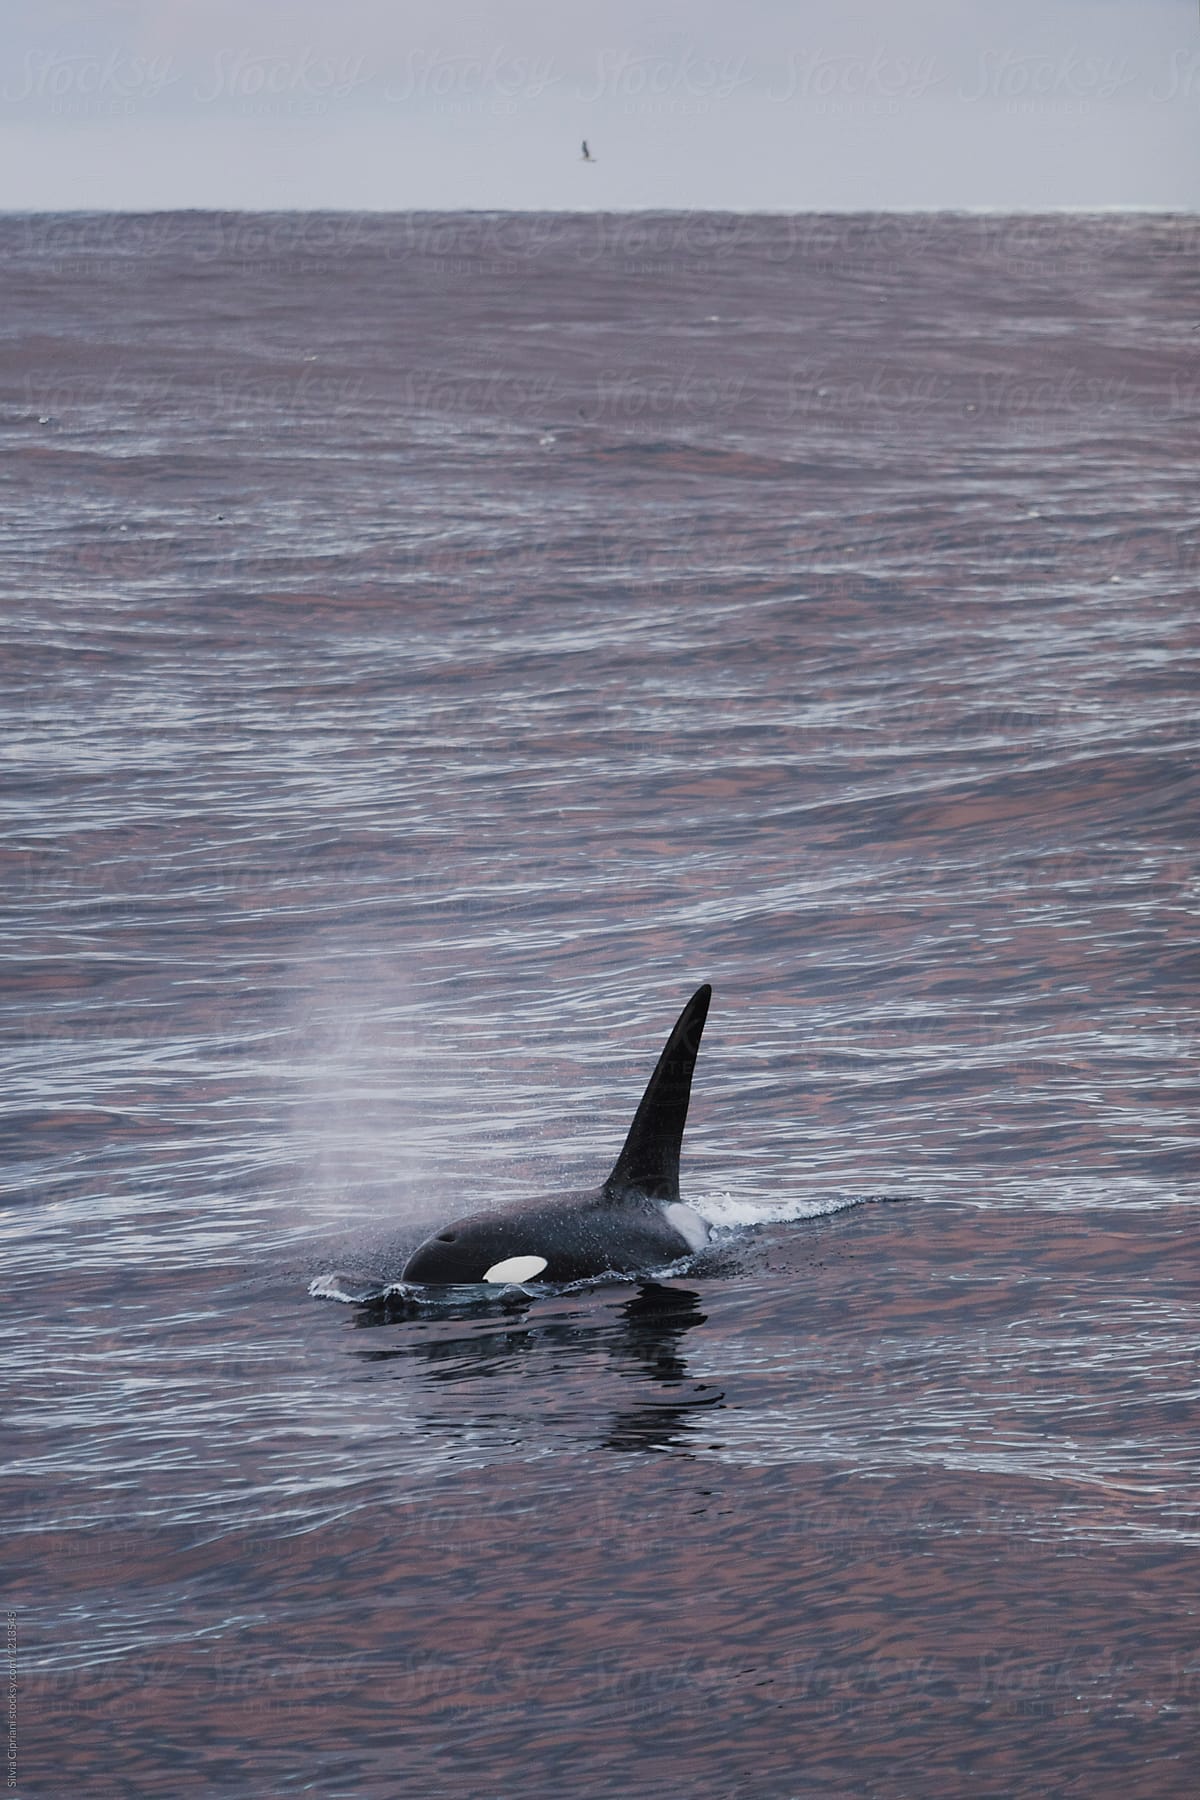 Wild killer whale out at sea